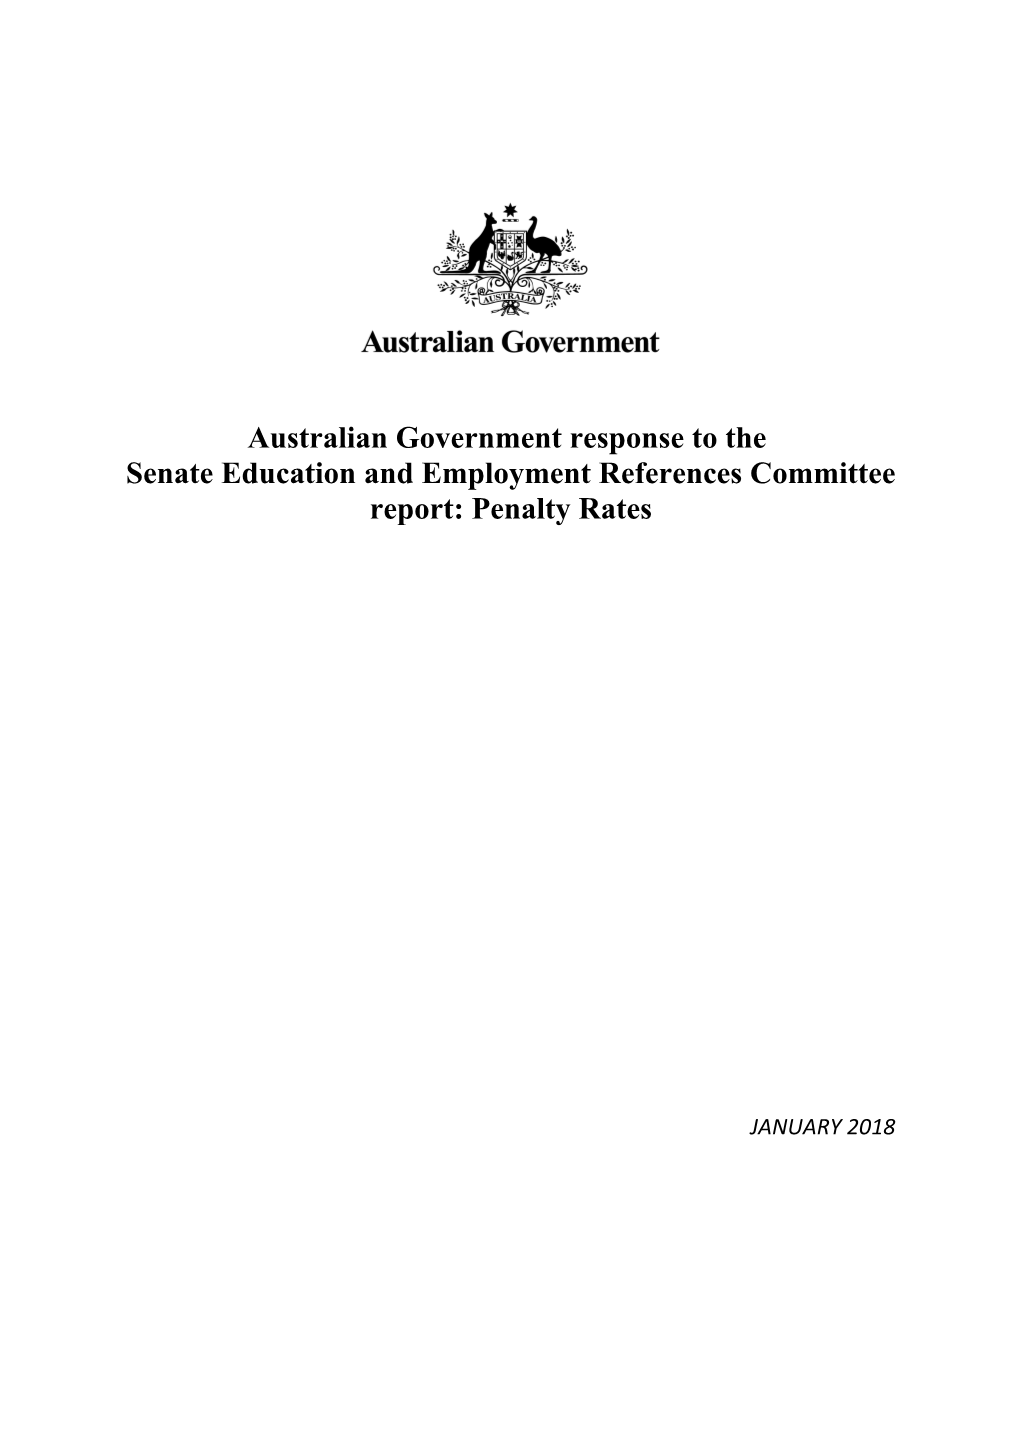 Australian Government Response to the Senate Education and Employment References Committee